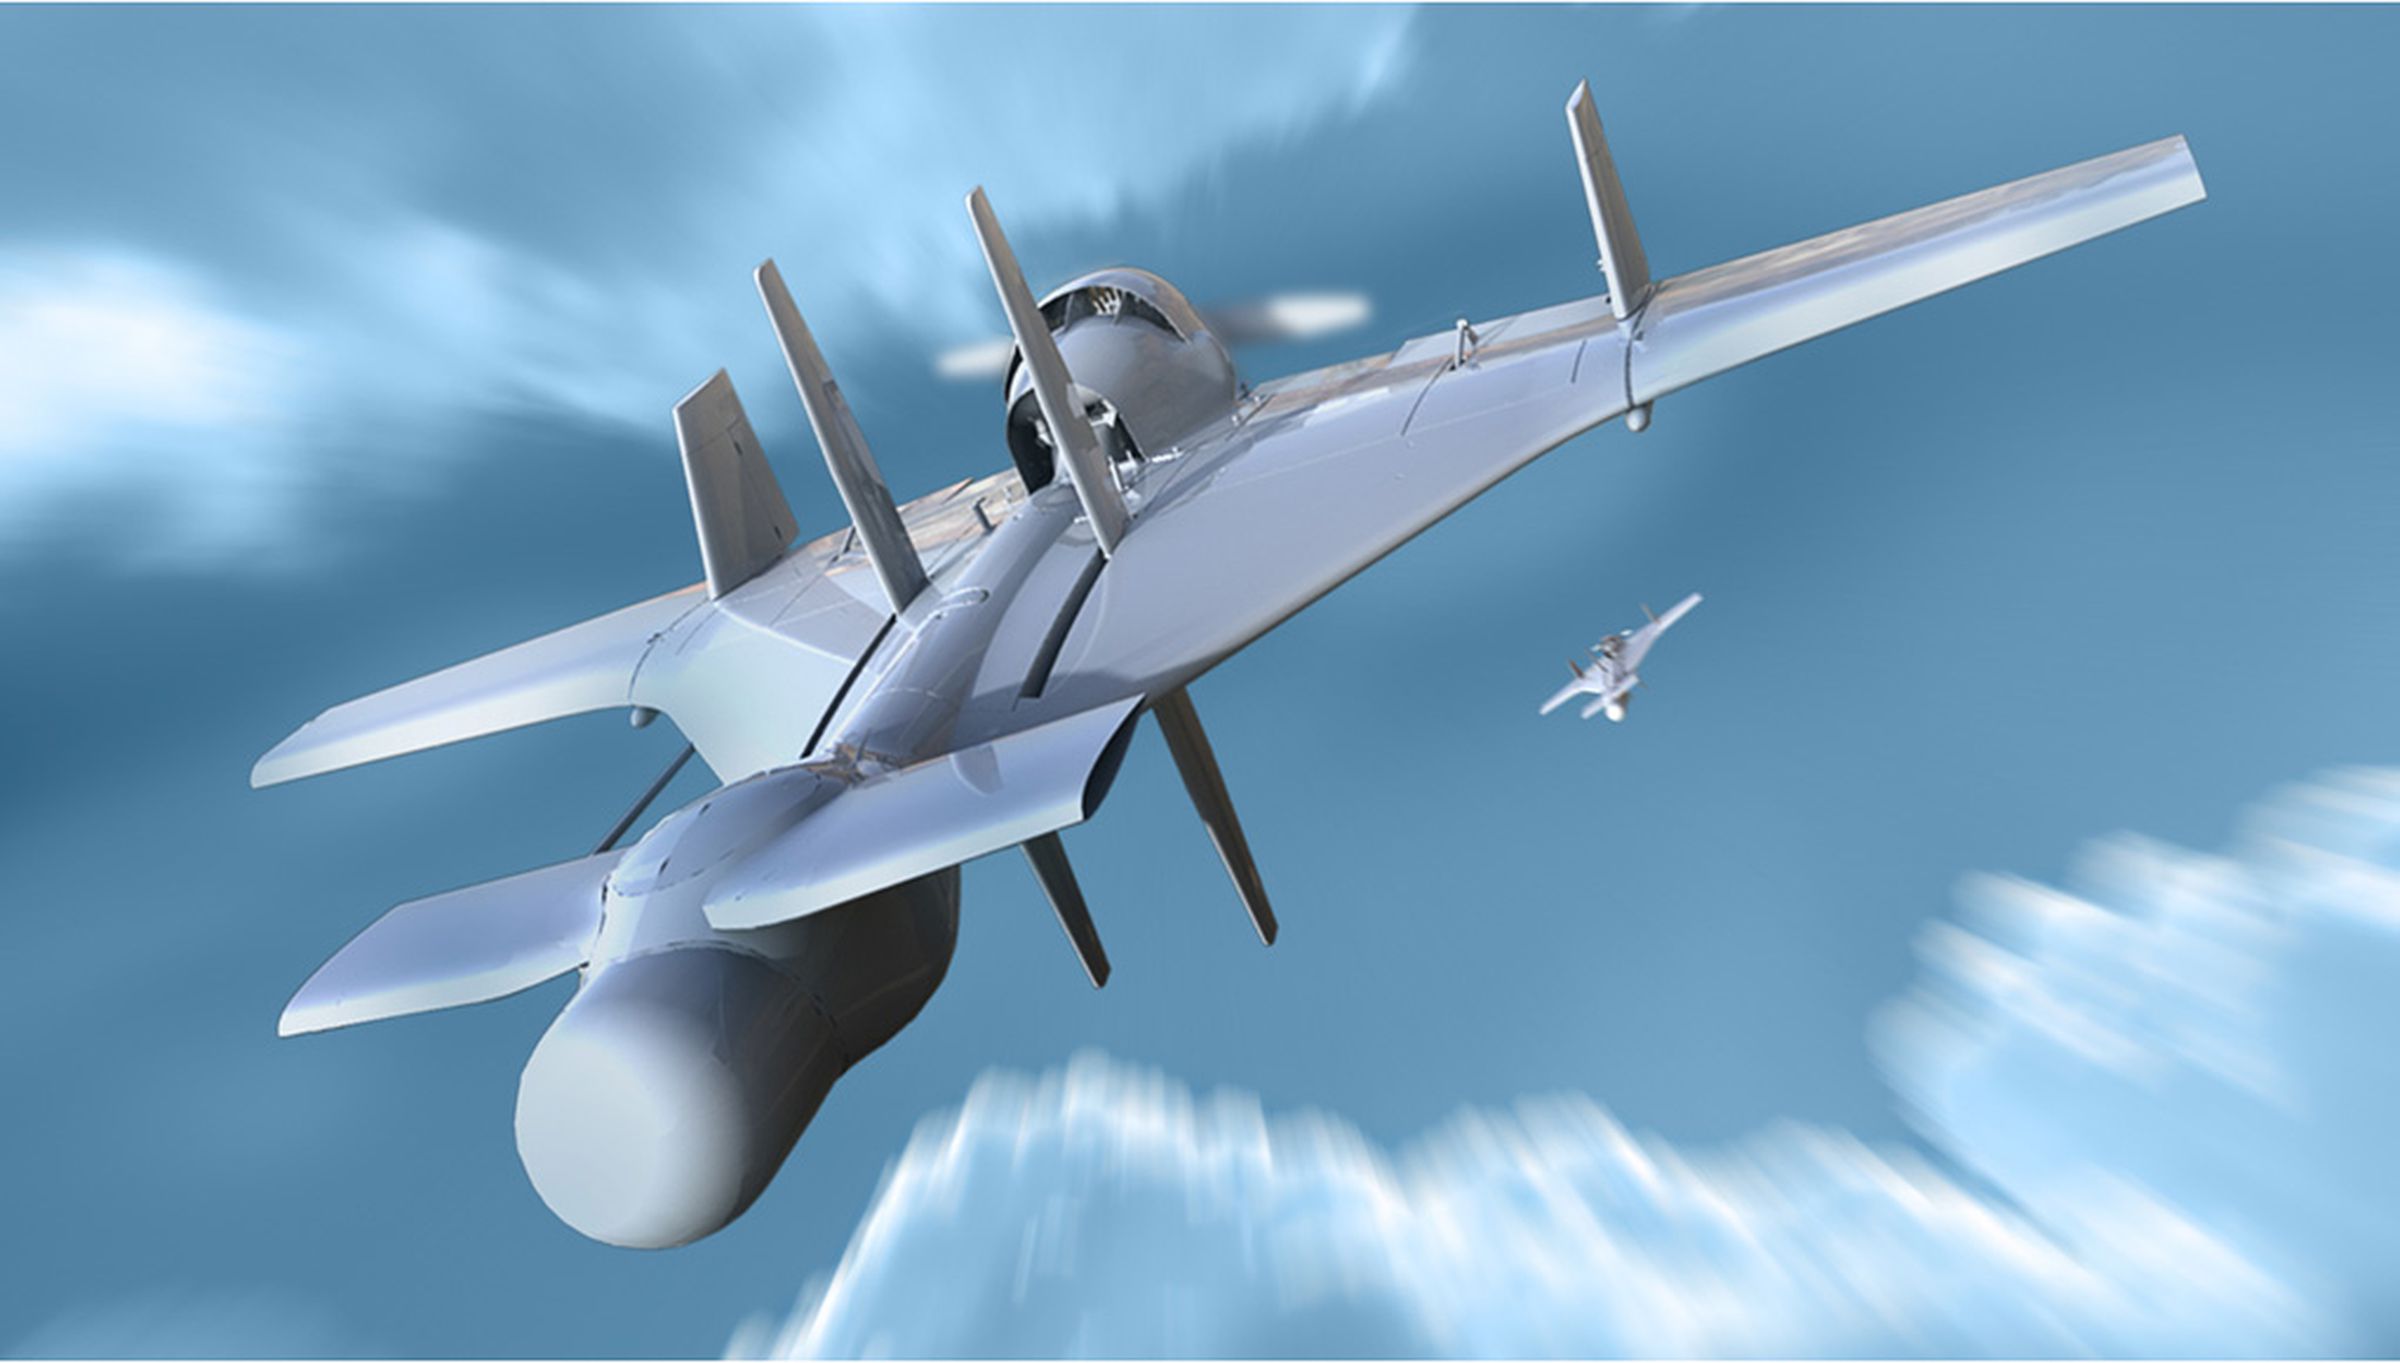 The IAI Harpy is launched from the ground and can linger for hours over a target area. 